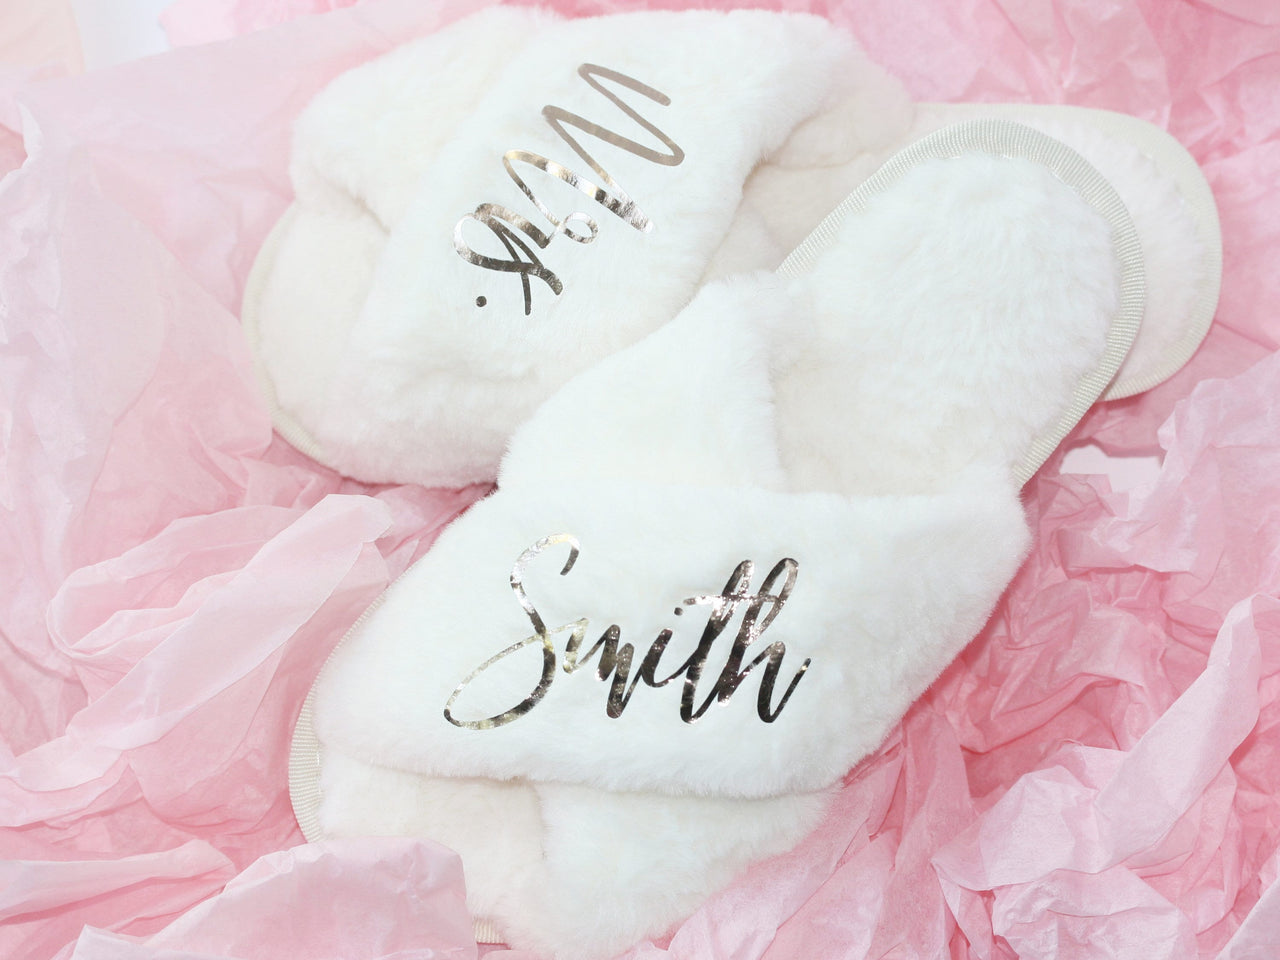 Bride Slippers, Bridesmaid slippers, Bridal slippers, custom slippers, fluffy slippers, Wedding slipper set, bridesmaid gifts, personalized